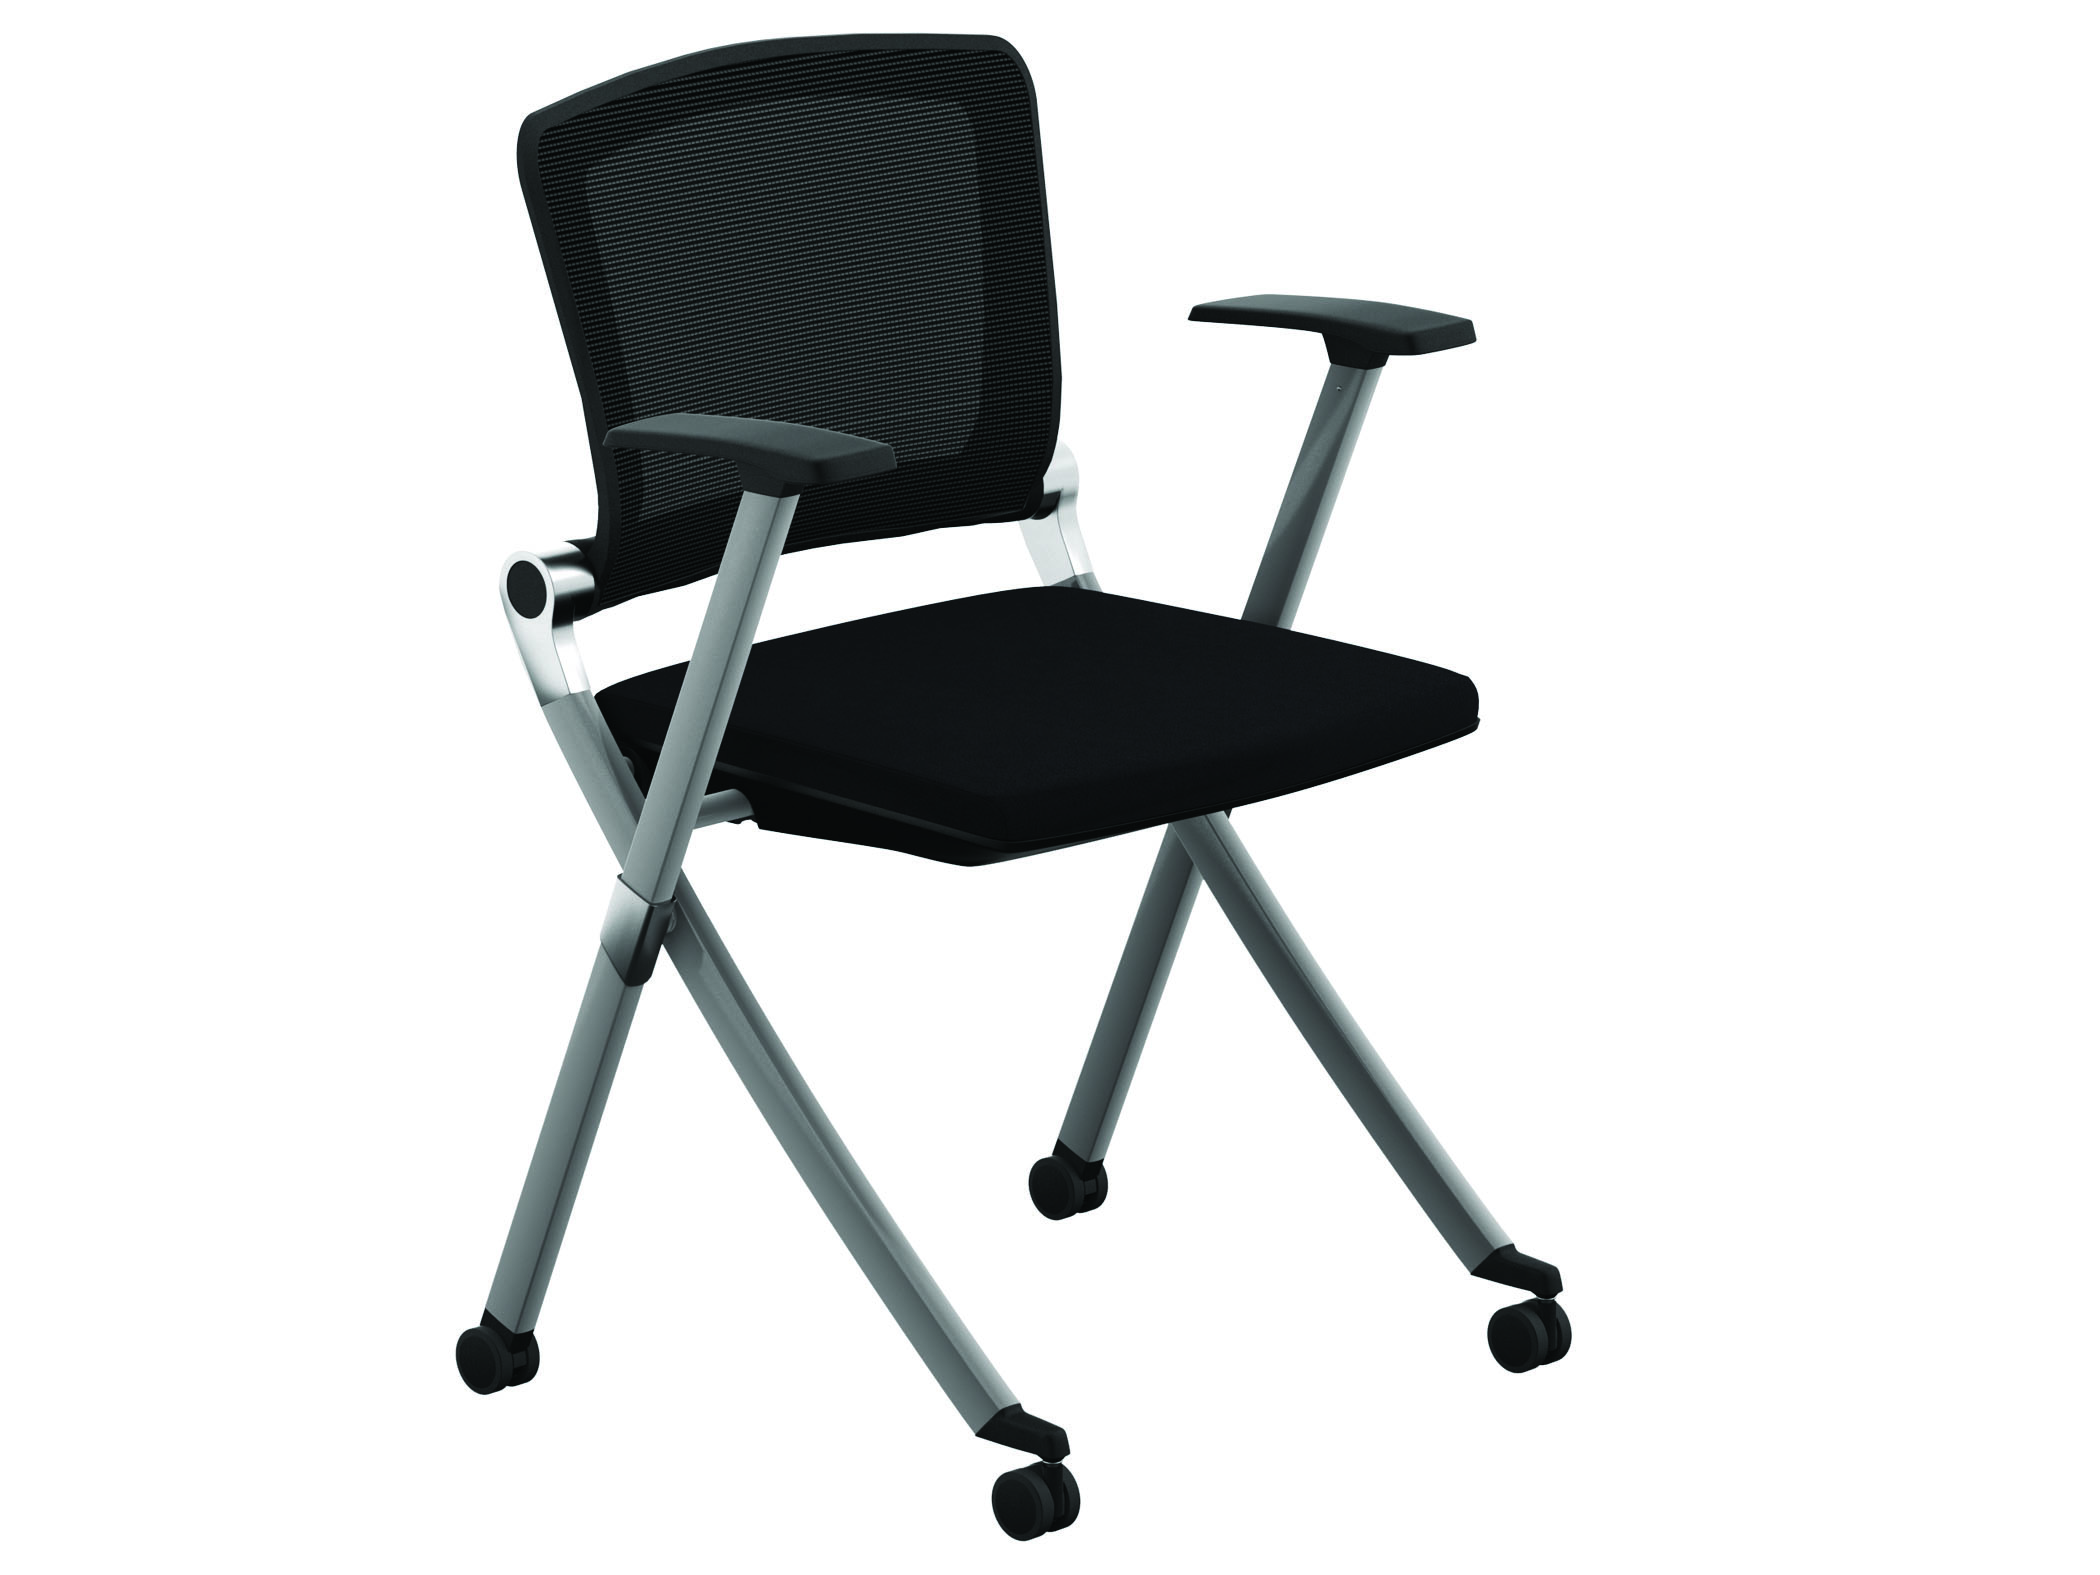 Cubicle Furniture from Compel - Ziggy guest chair